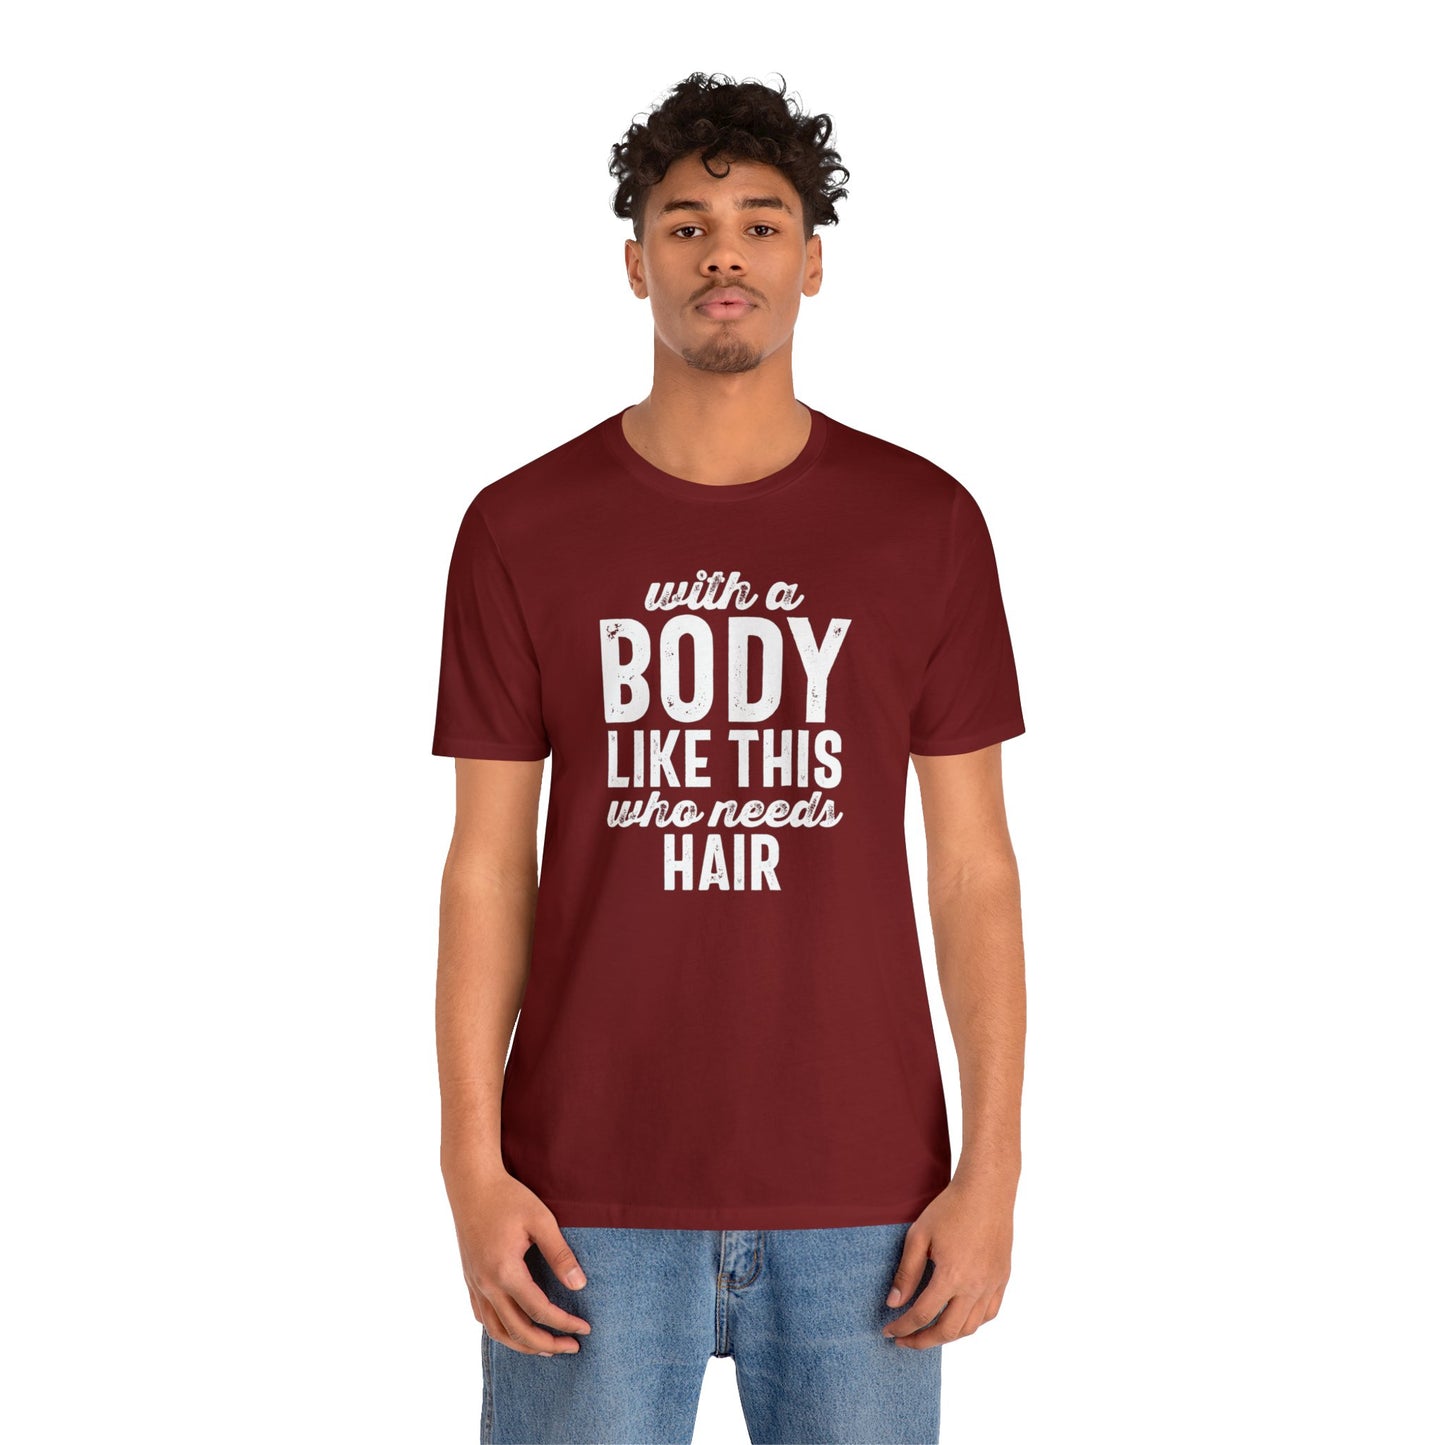 With a Body Like This, Who Needs Hair - Wicked Naughty Apparel